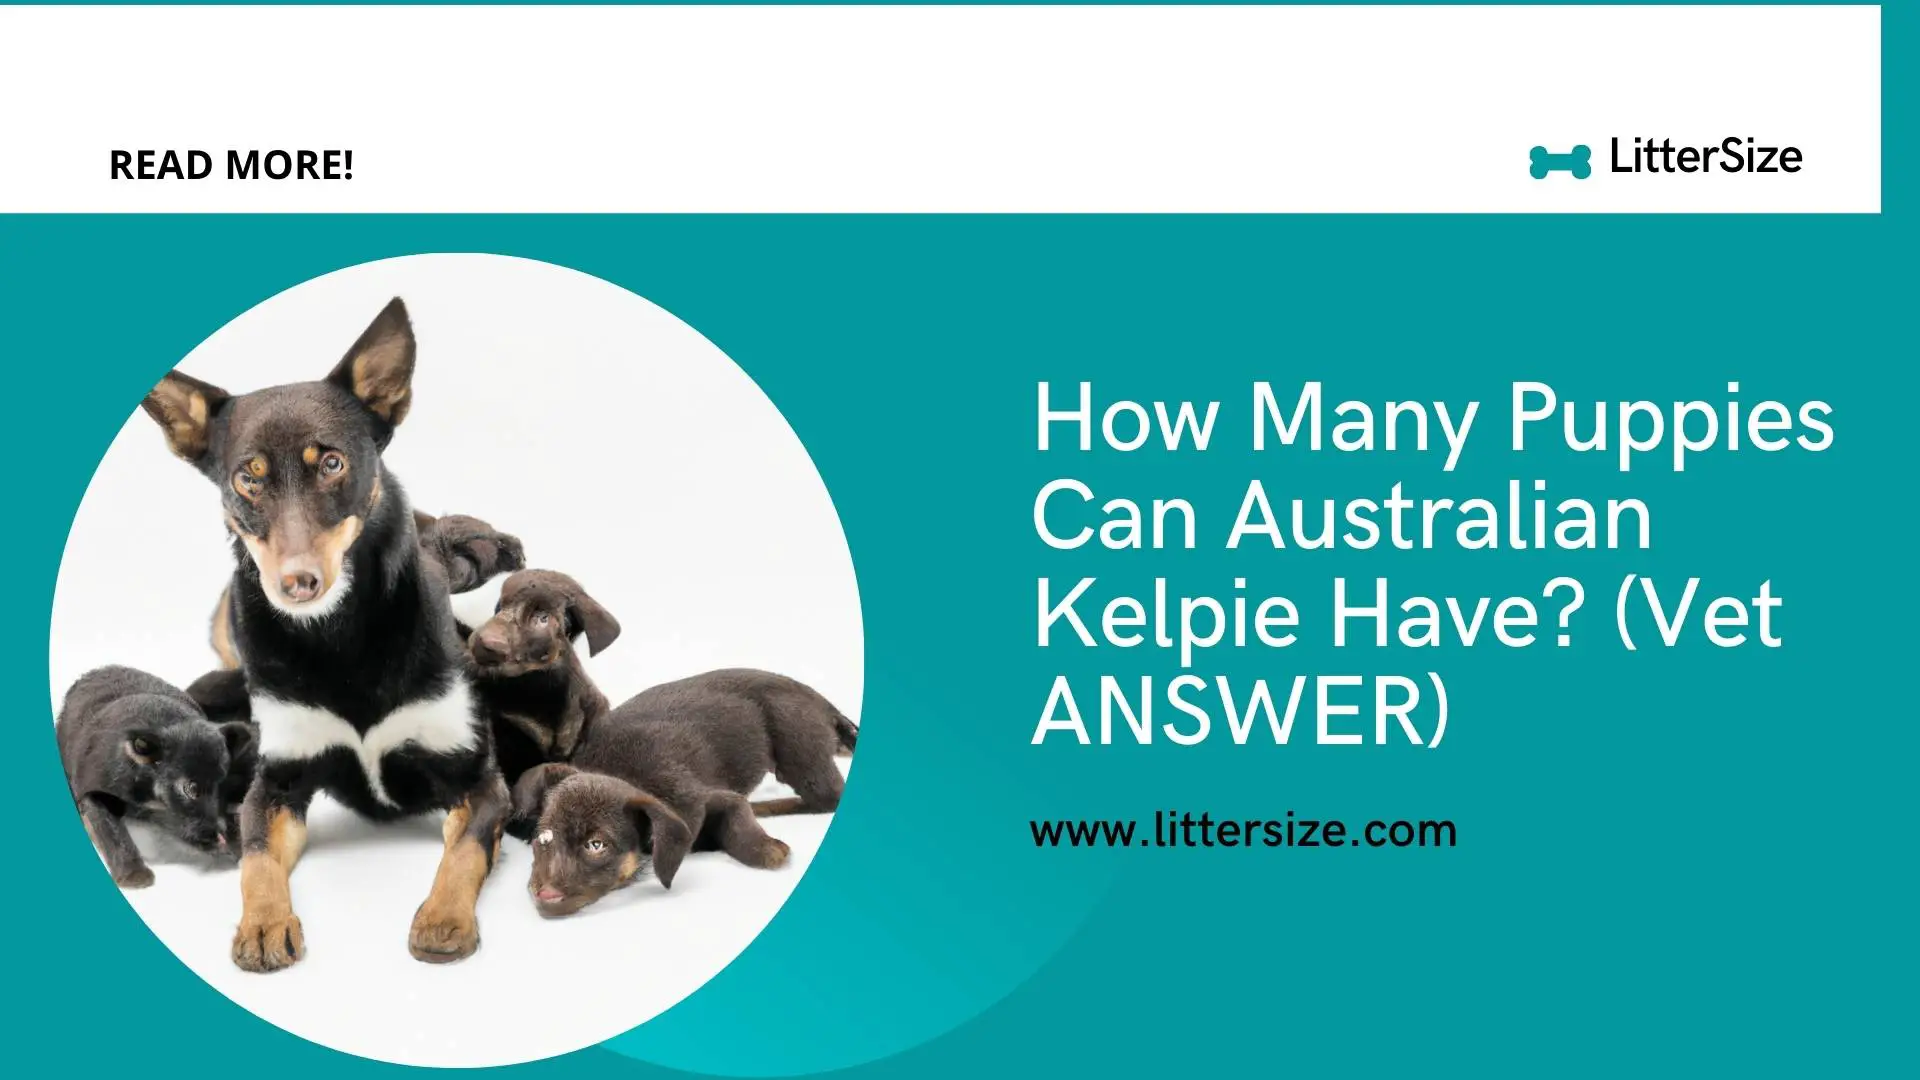 How Many Puppies Can Australian Kelpie Have? (Vet ANSWER)